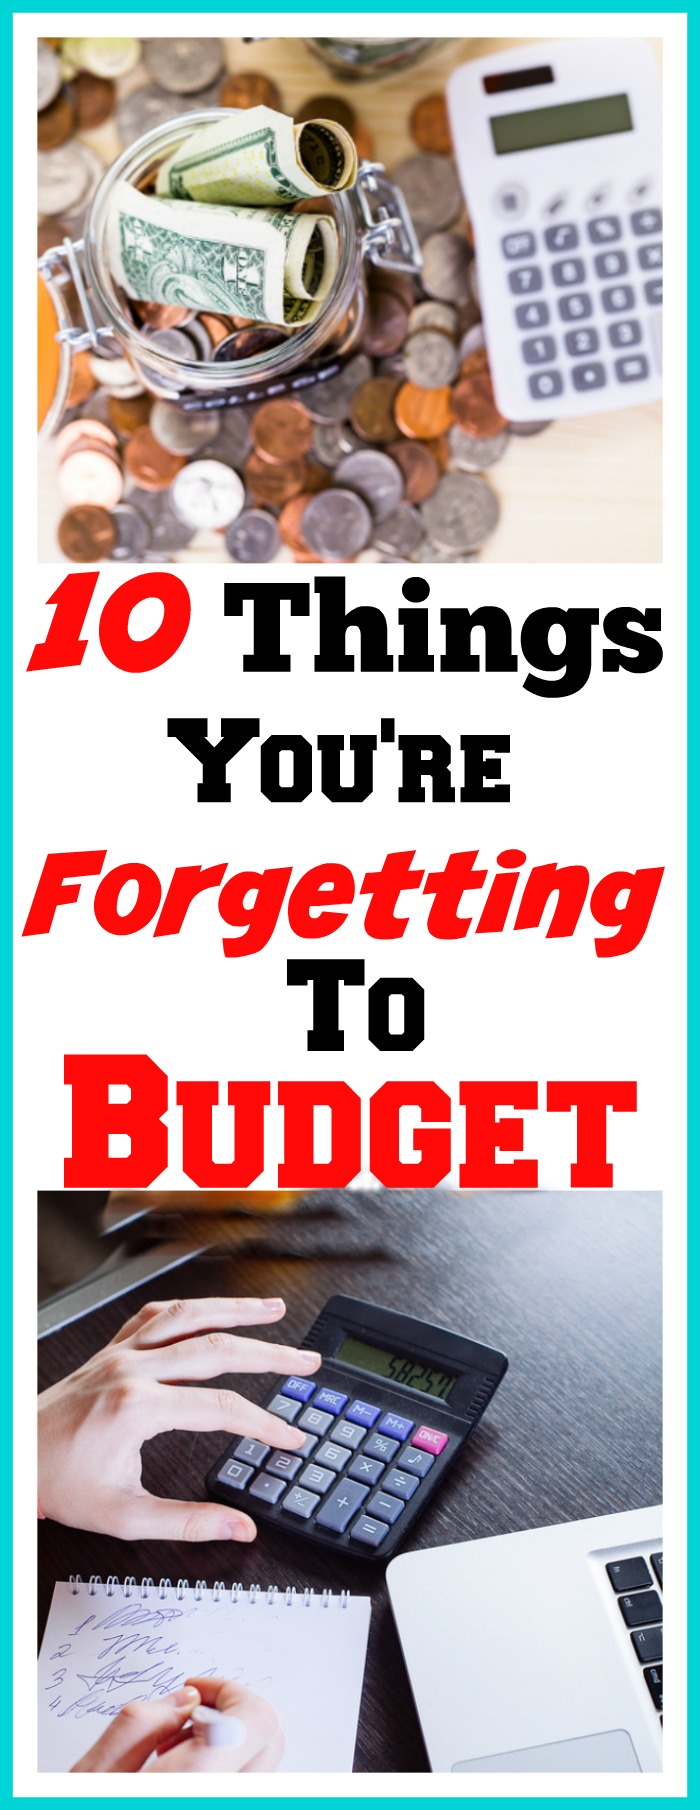 10 Things You're Forgetting to Budget For